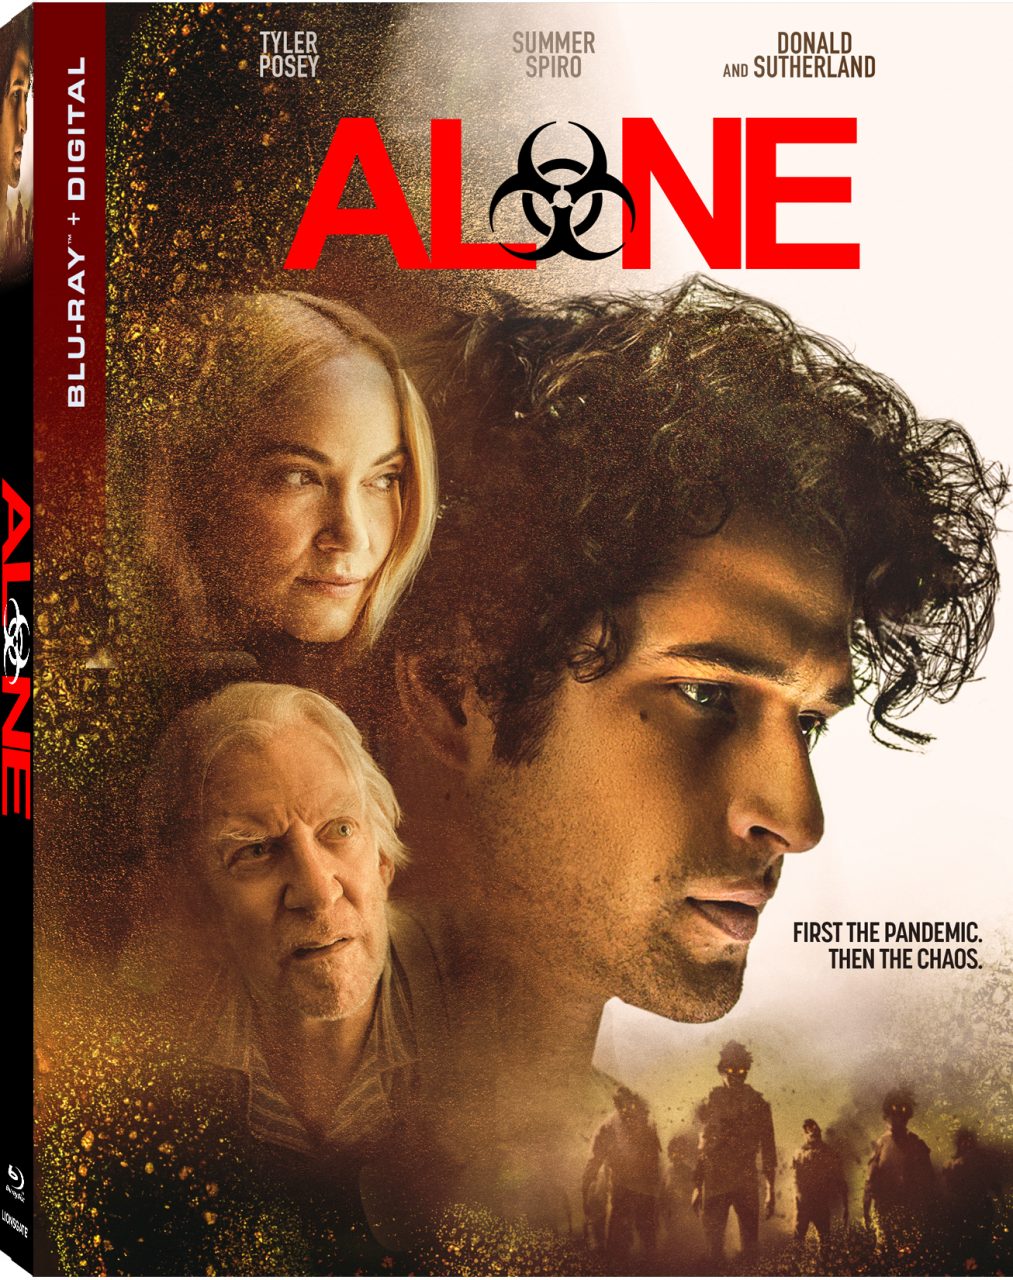 Alone Blu-Ray cover (Lionsgate Home Entertainment)